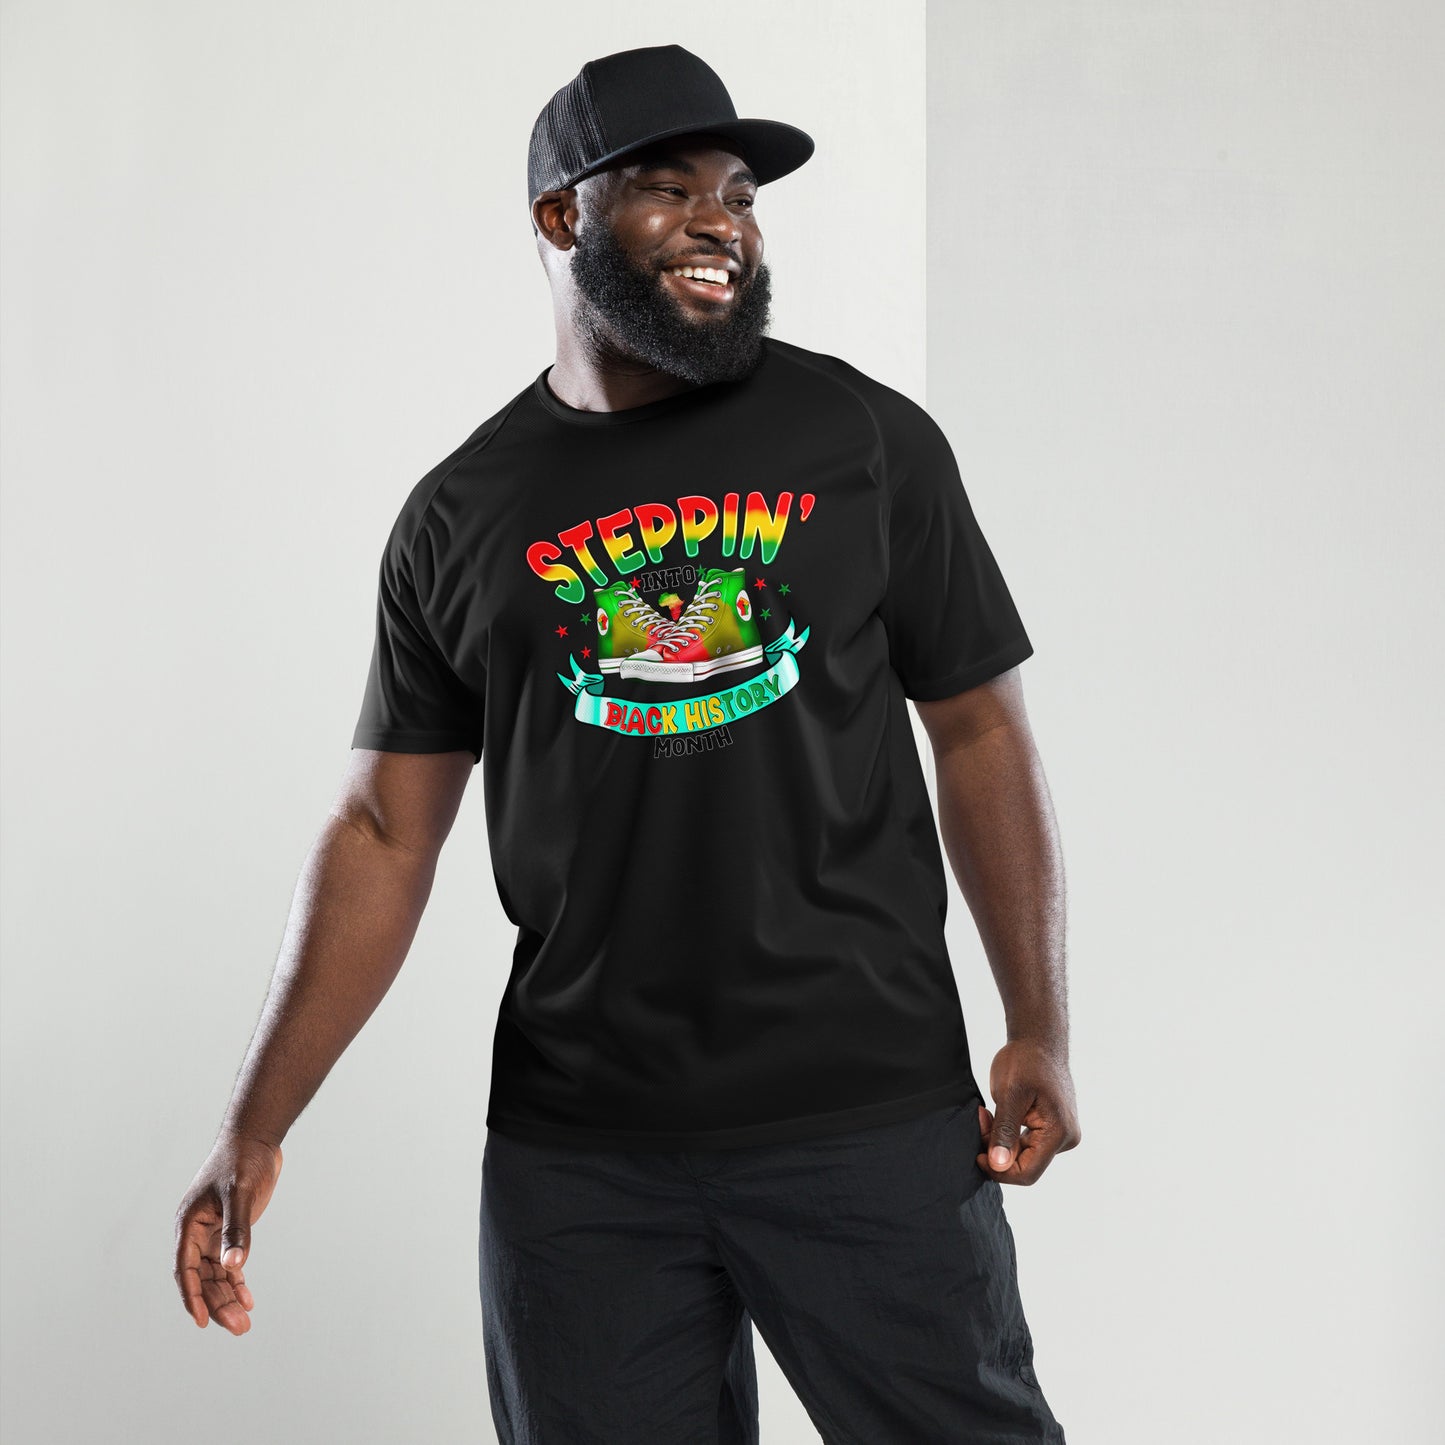 Unisex sports jersey - Steppin Into Black History Month